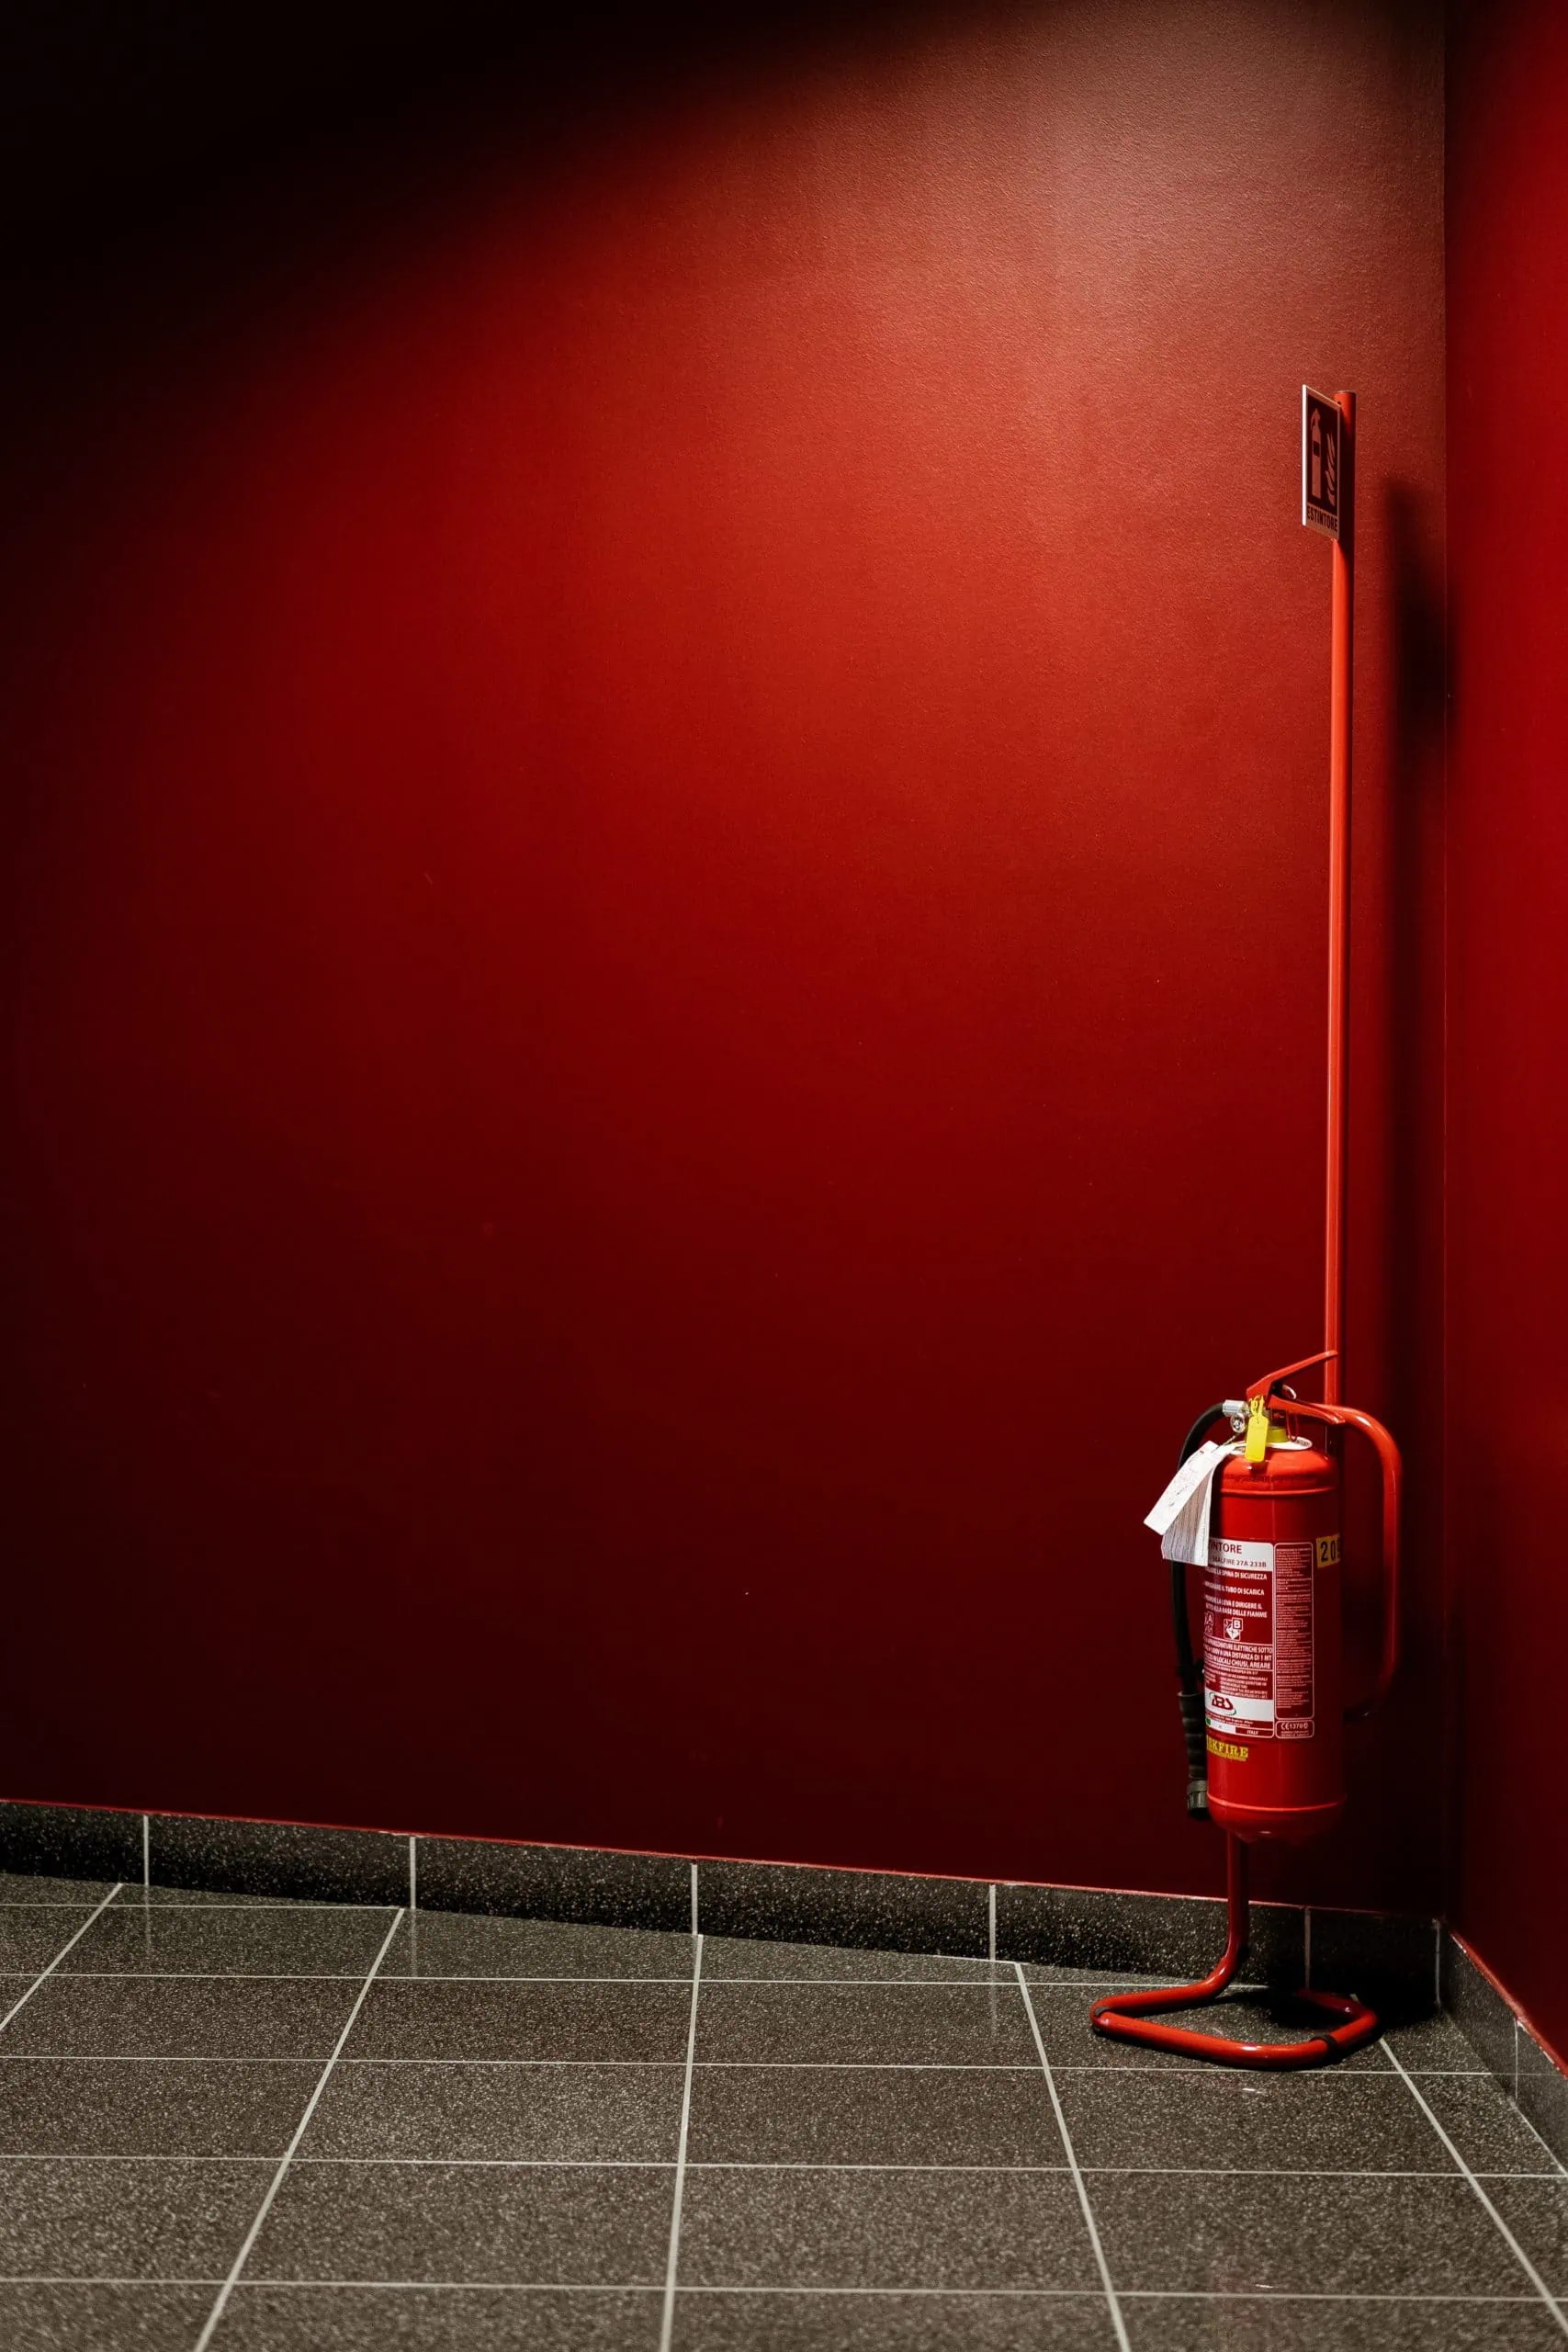 Fire safety with a fire extinguisher and a smoke detector security camera system